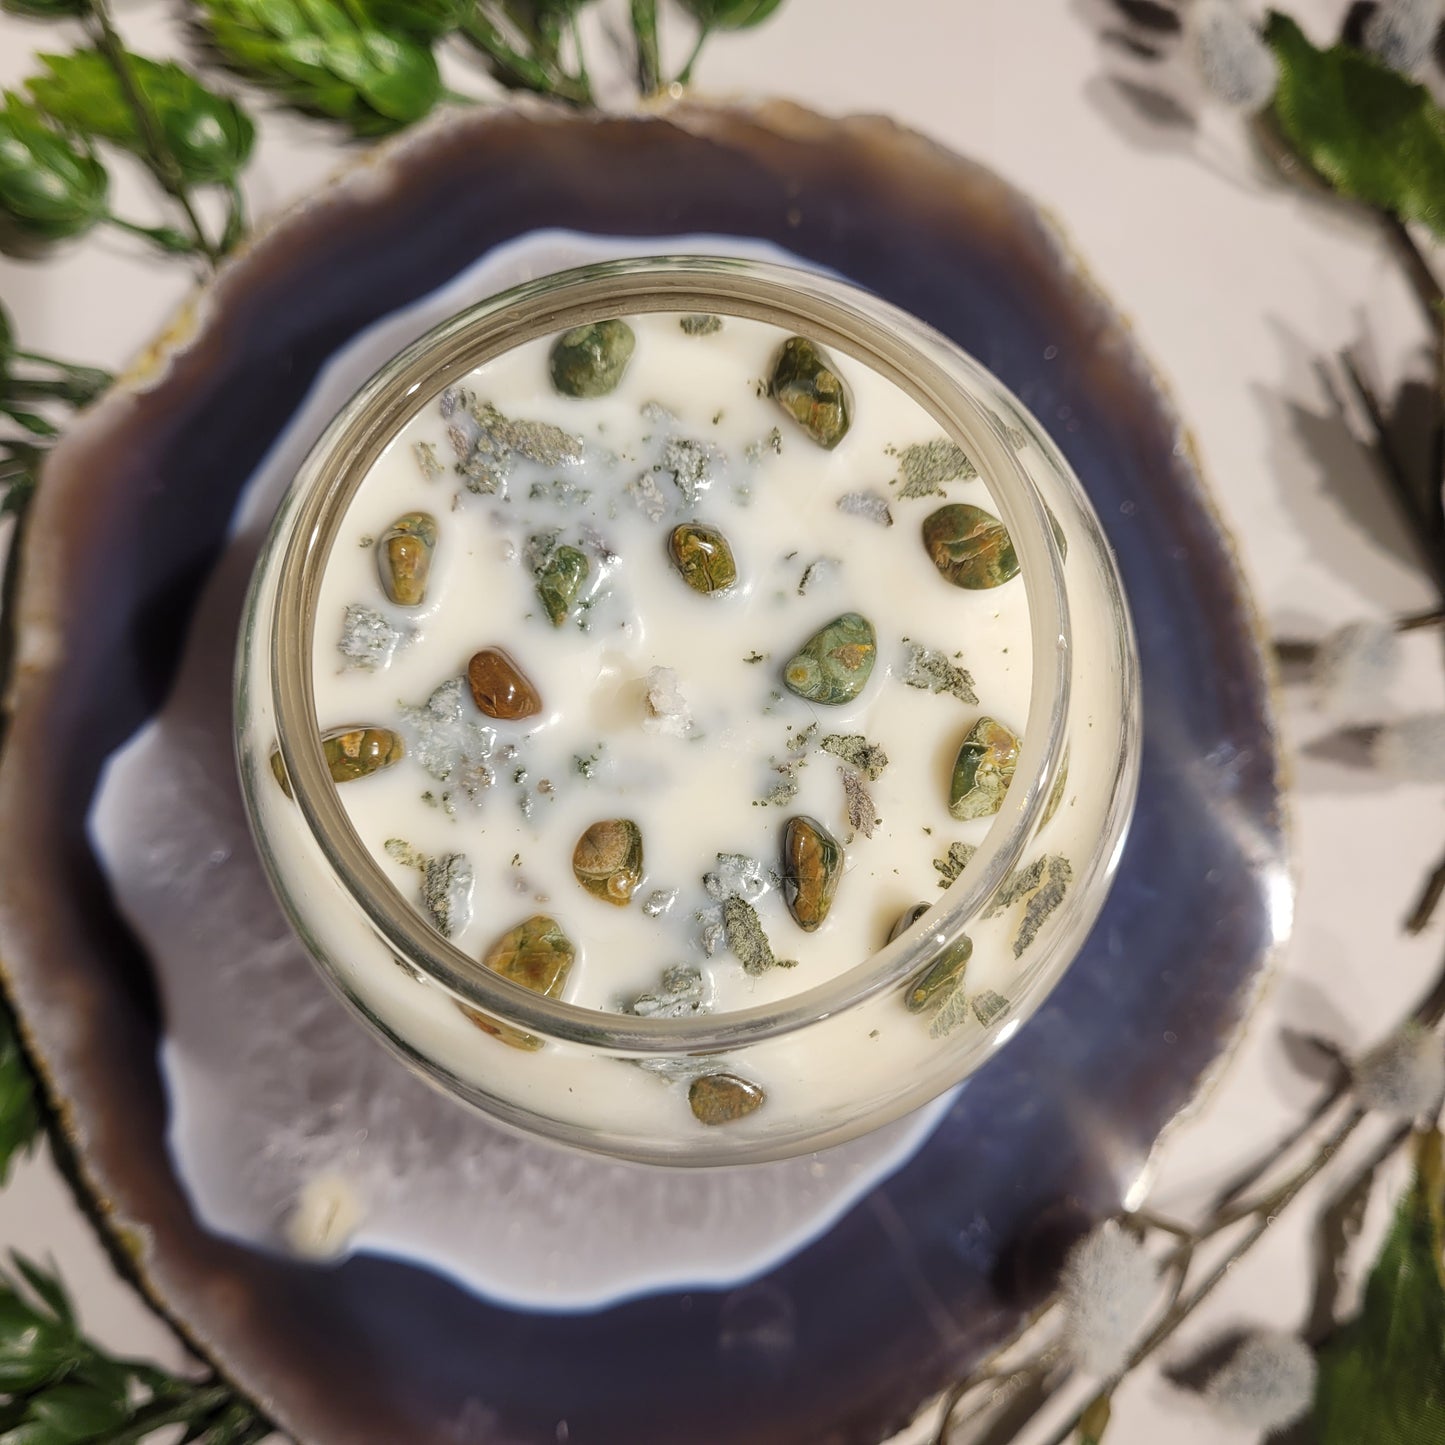 Sage Cypress Soy Candle